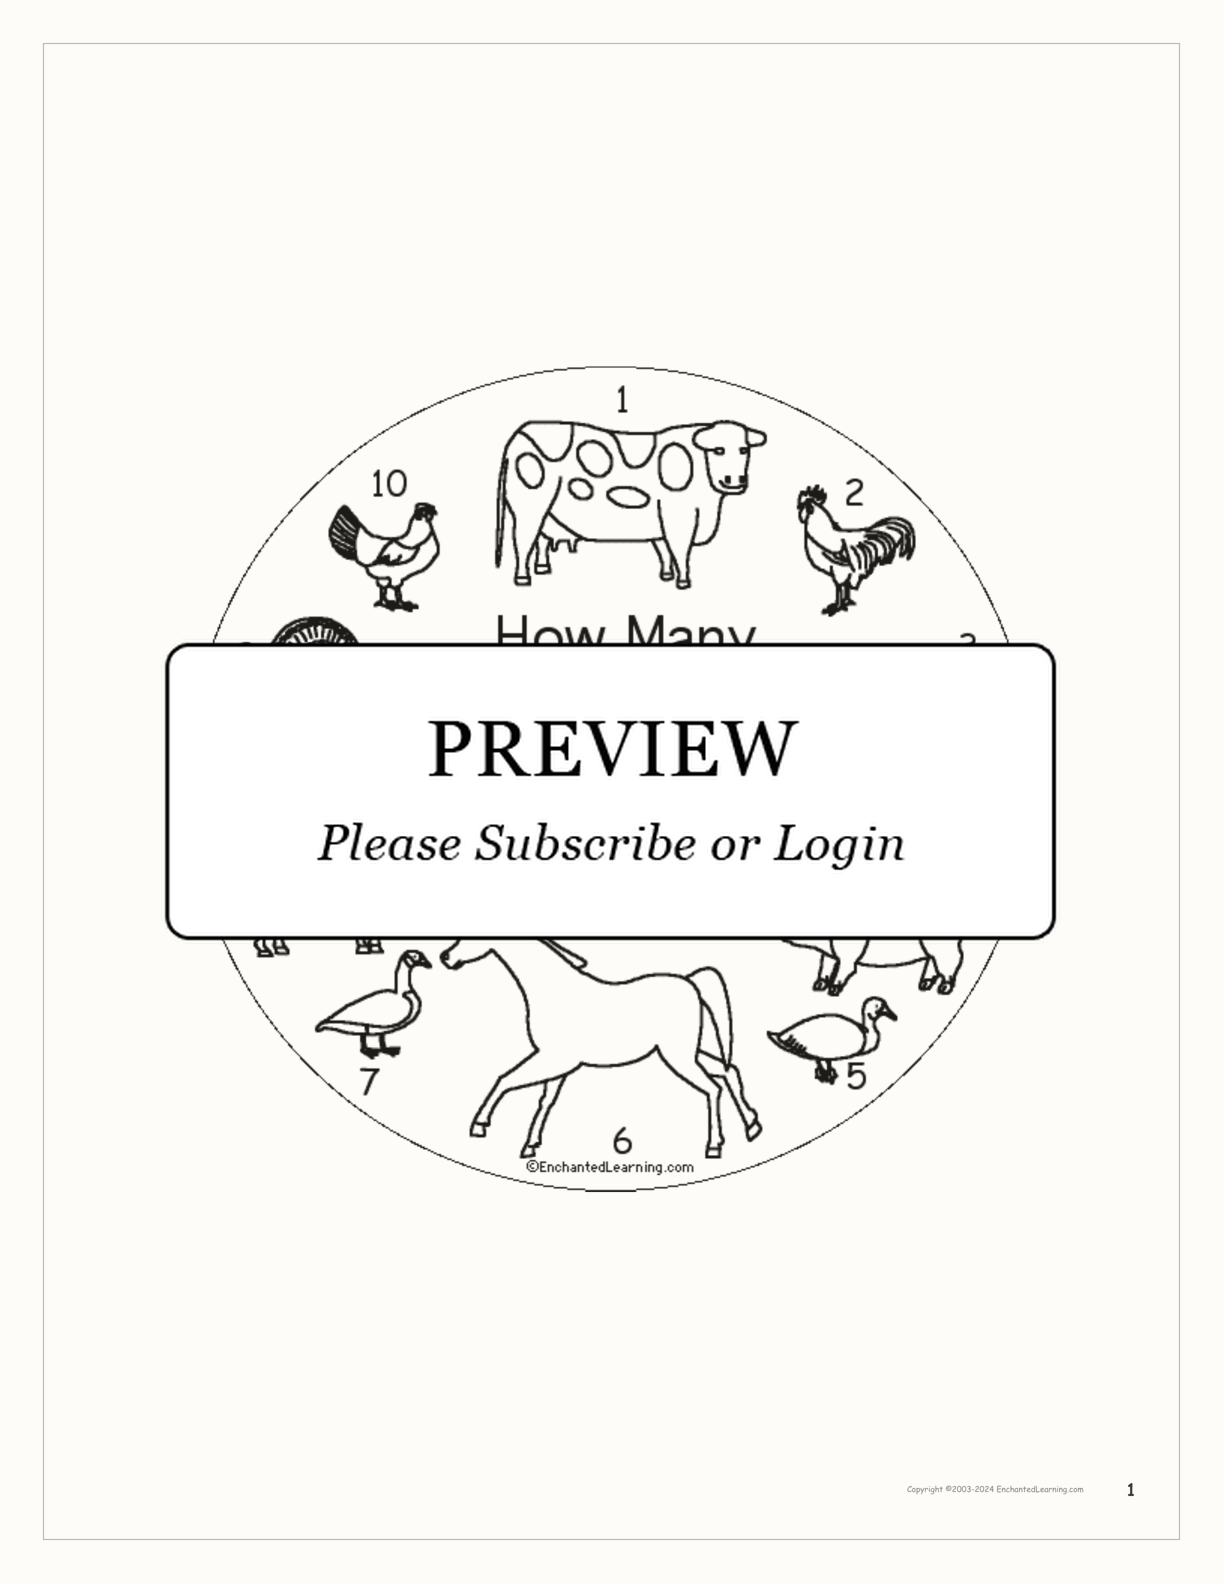 How Many Farm Animals? Book for Early Readers interactive printout page 1